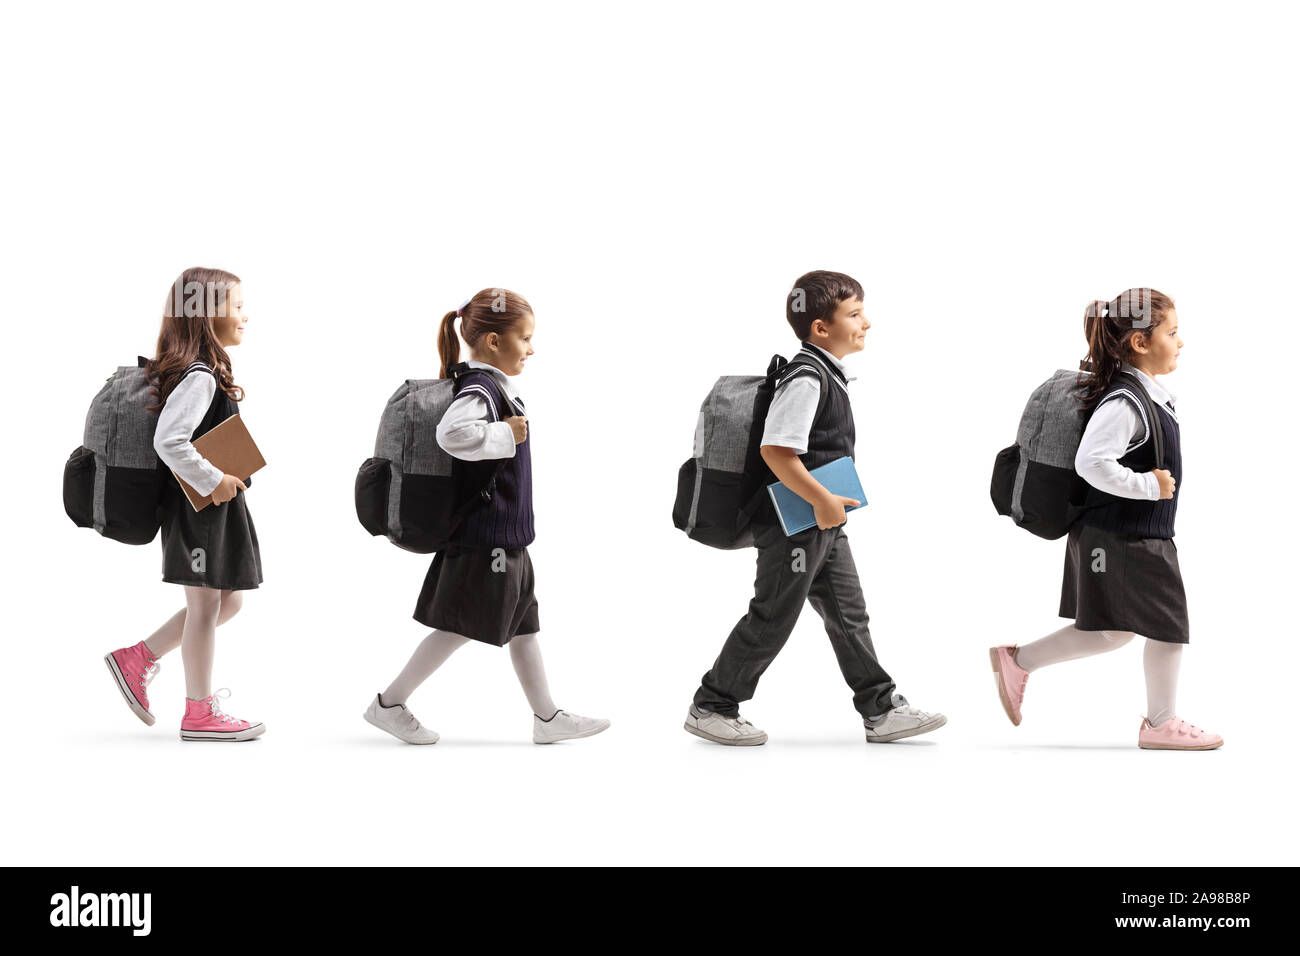 Full length profile shot of schoolchildren in uniforms walking in line isolated on white background Stock Photo